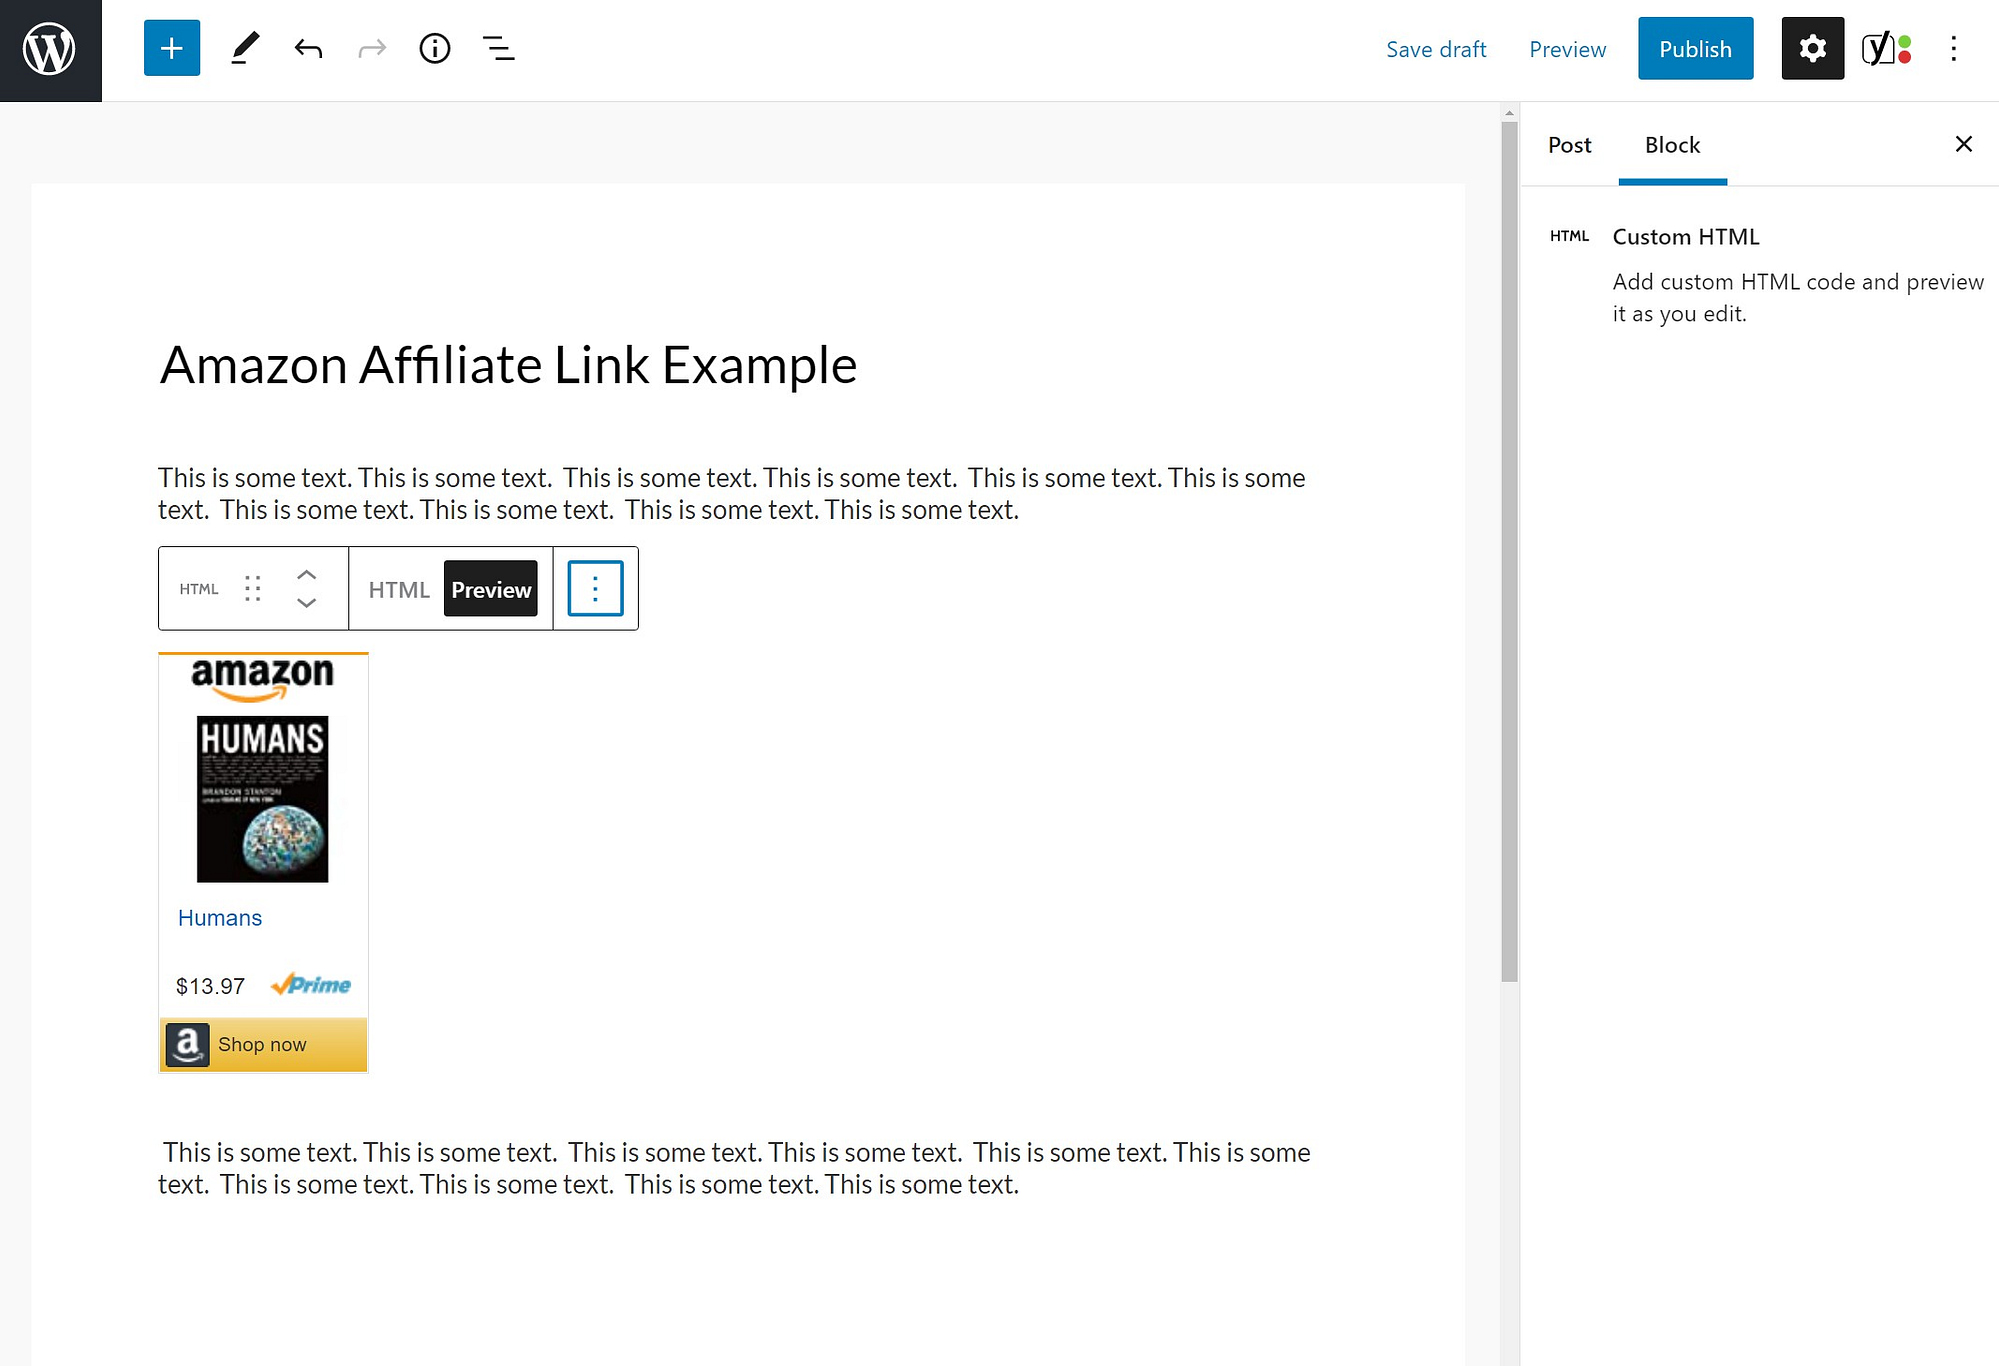 Previewing your affiliate link